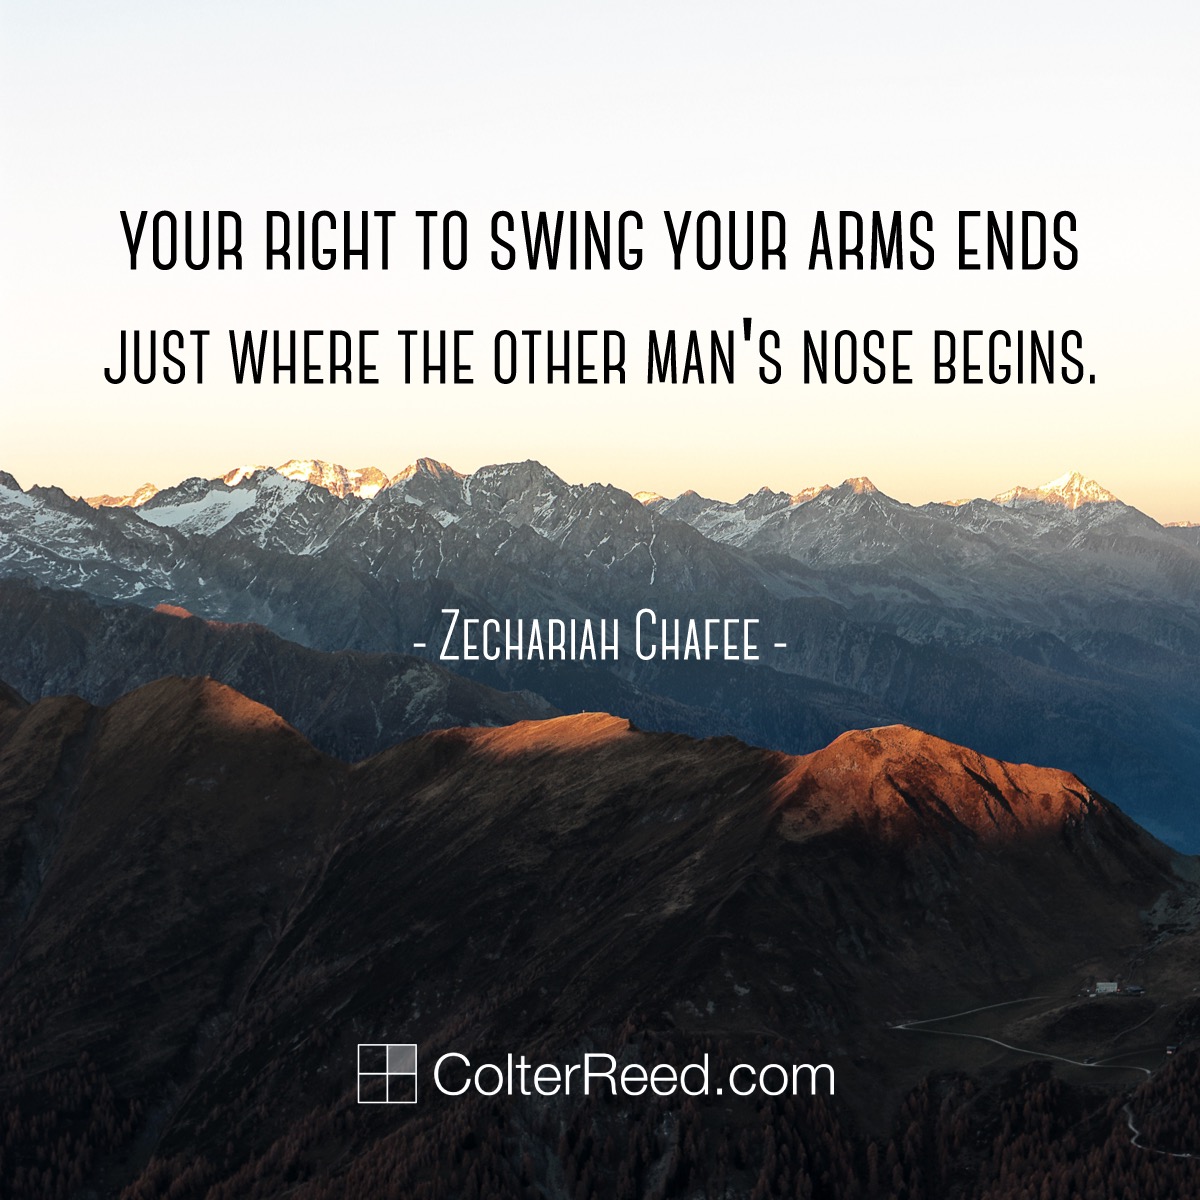 Your right to swing your arms ends just where the other man’s nose begins.